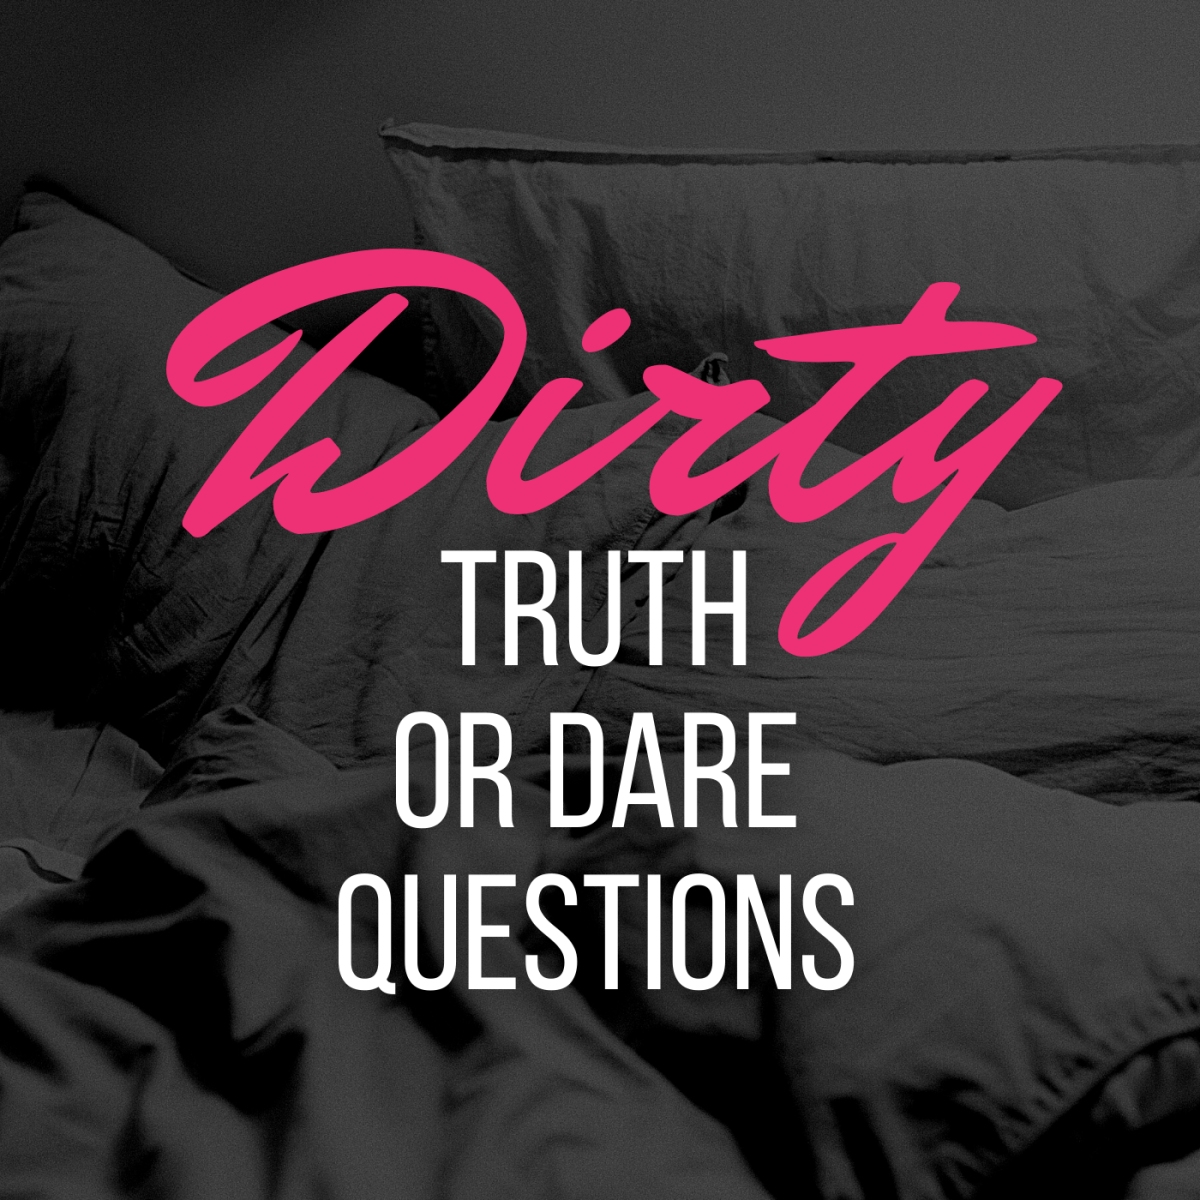 Grab your S.O. or some adventurous friends and try out these provocative truths and juicy dares!